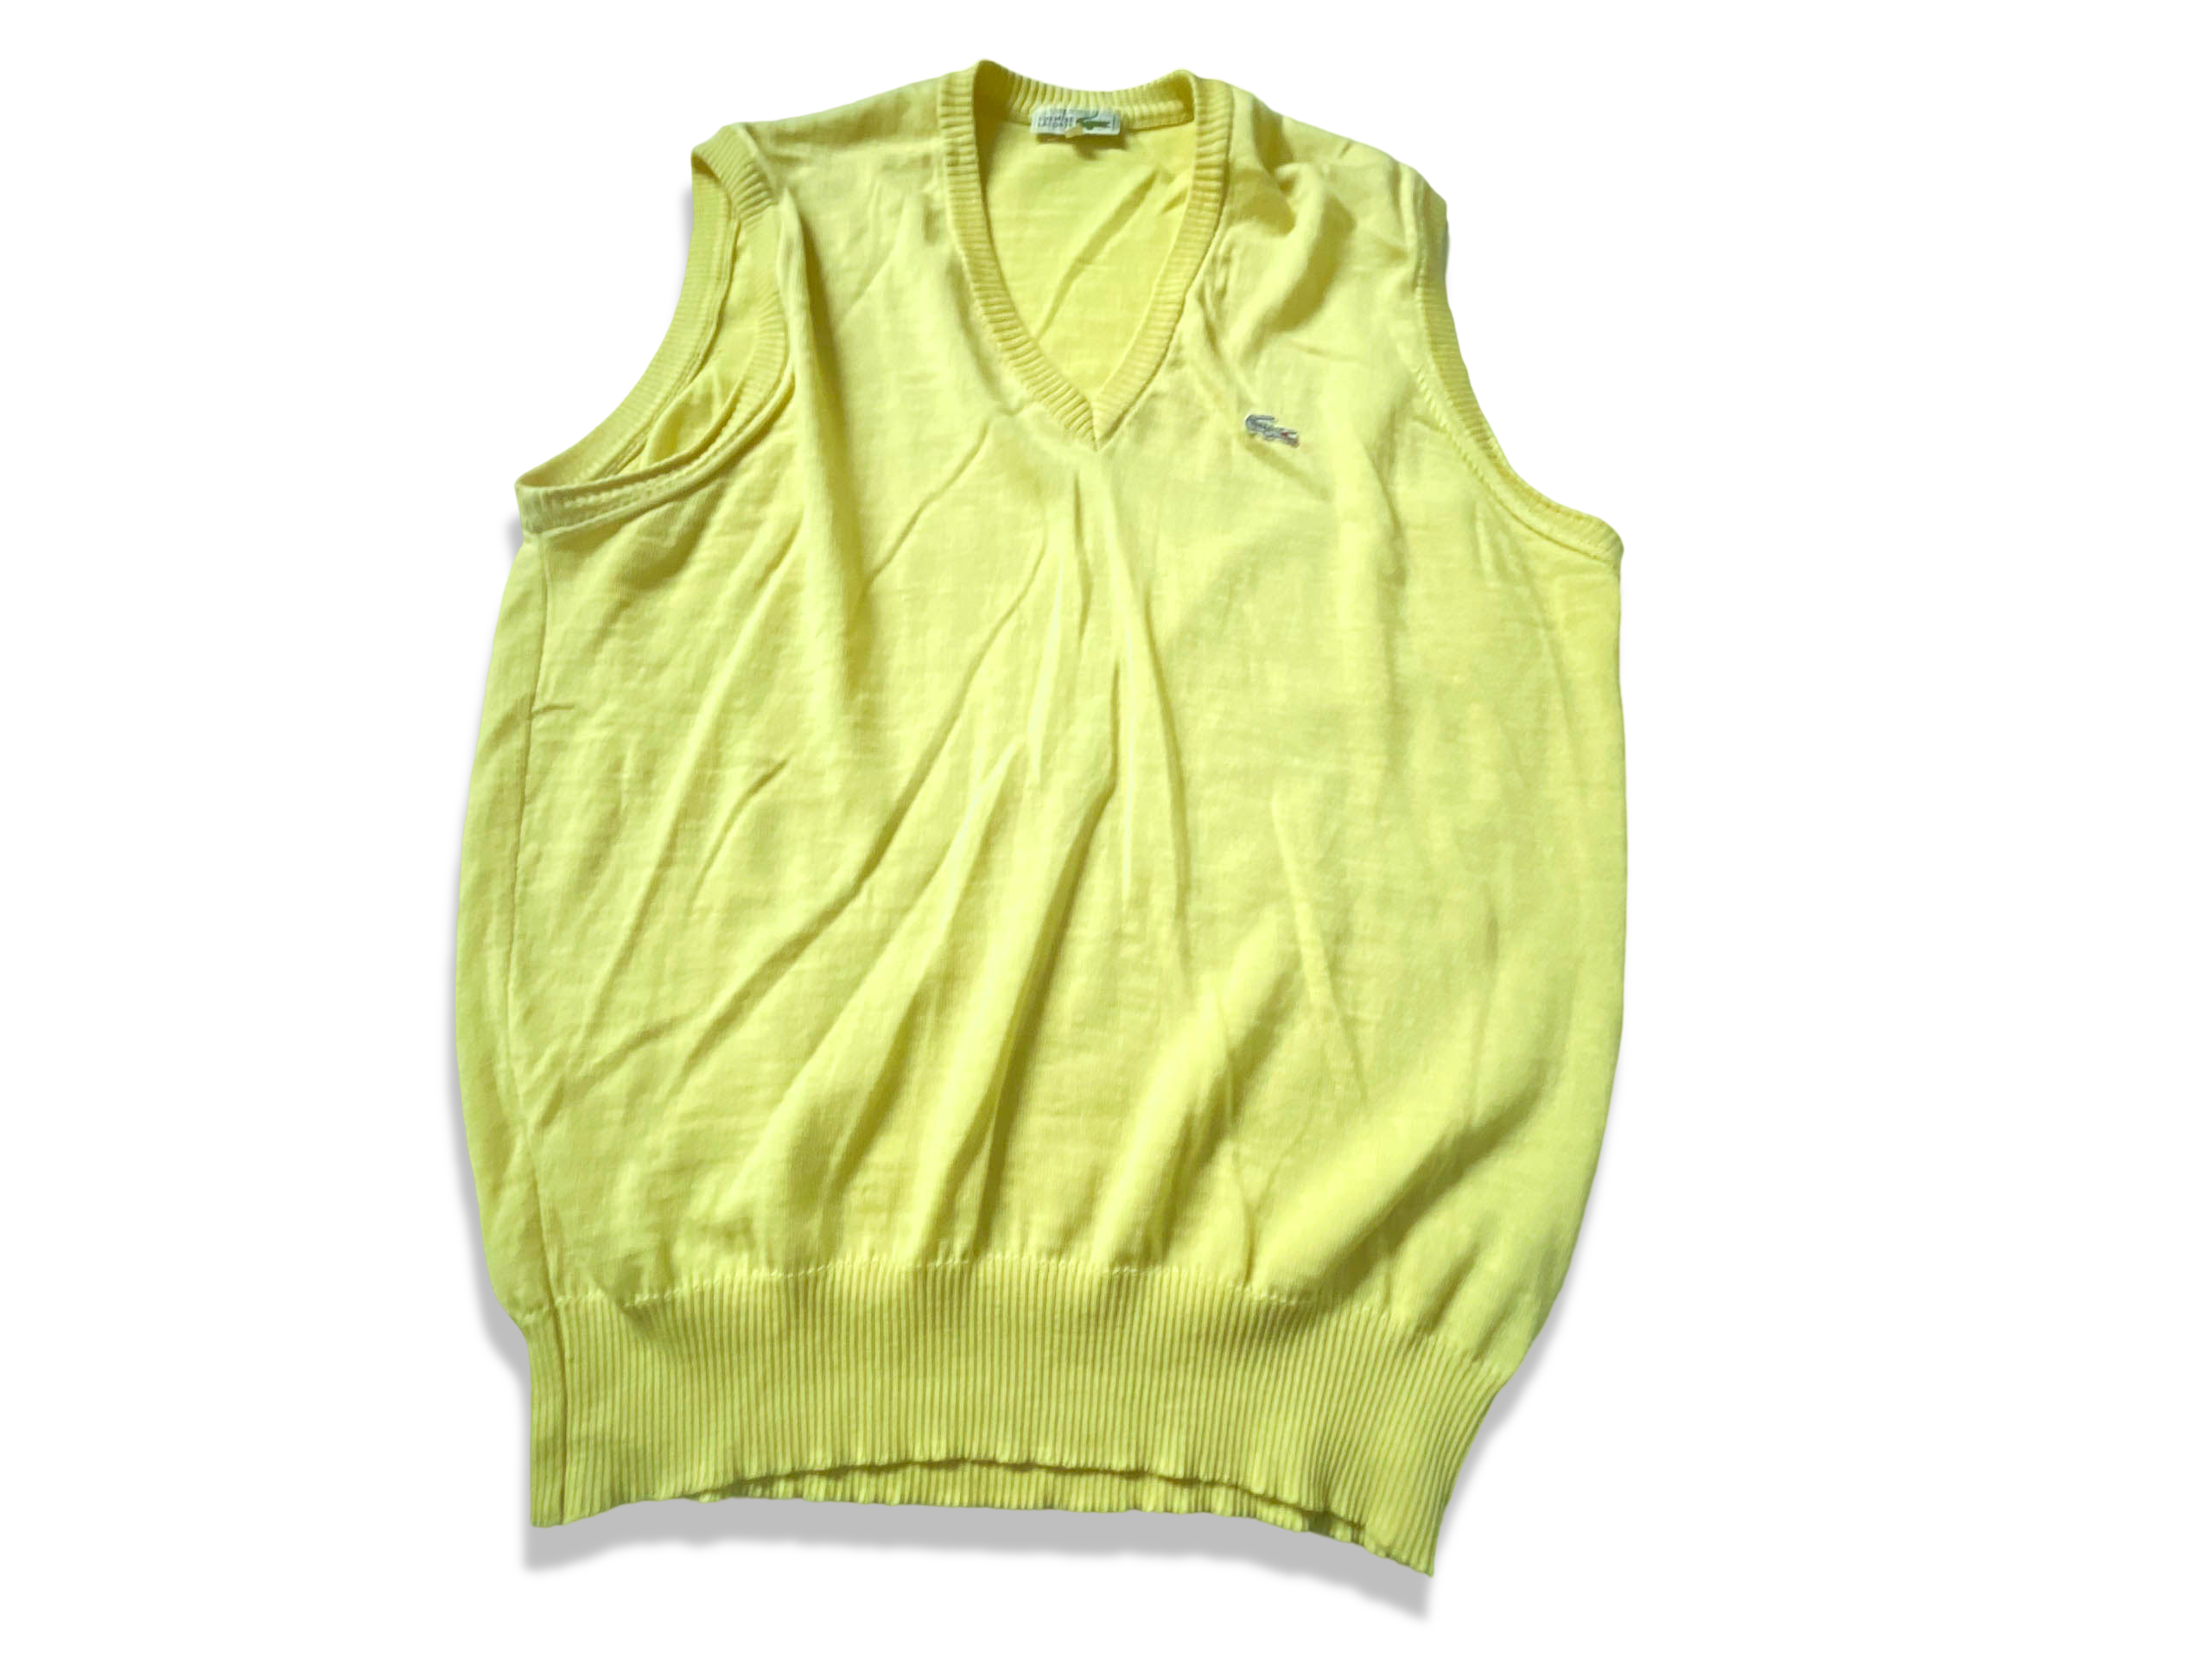 Vintage Lacoste Chemise Yellow sleeveless Cardigan in M made in France|L28W22|SKU 3908